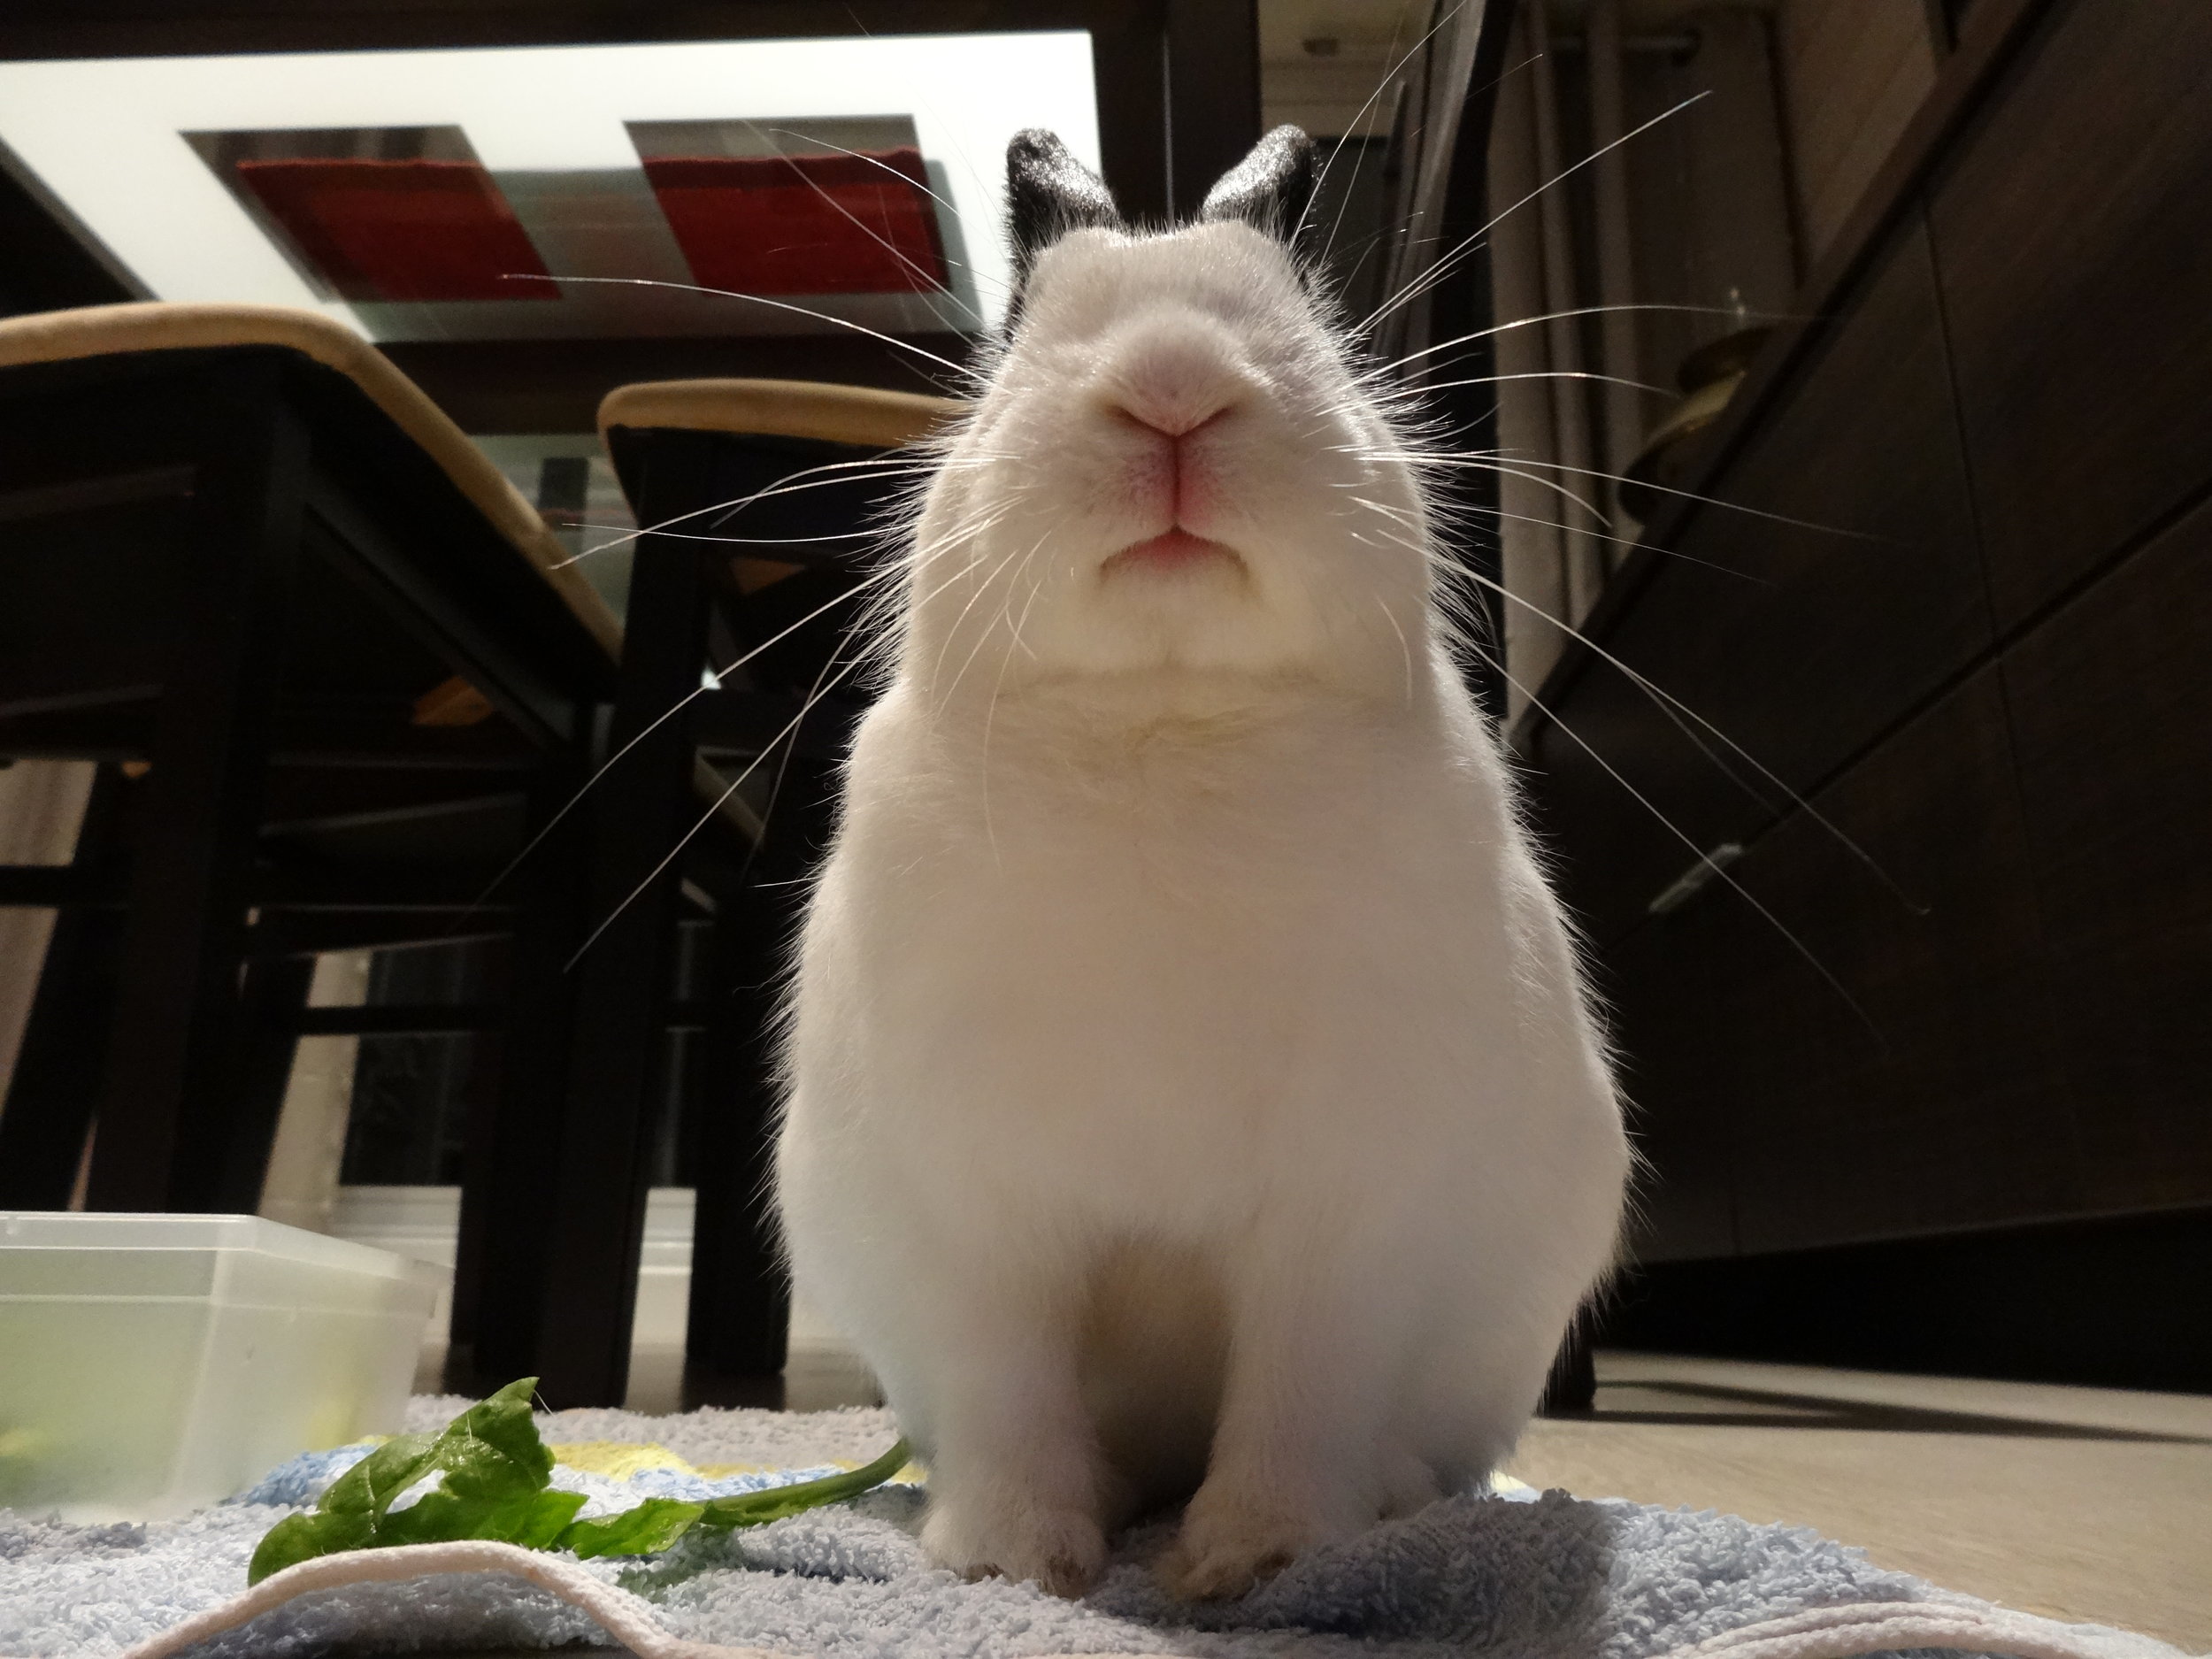 Bunny Disapproves of These Sparse Offerings